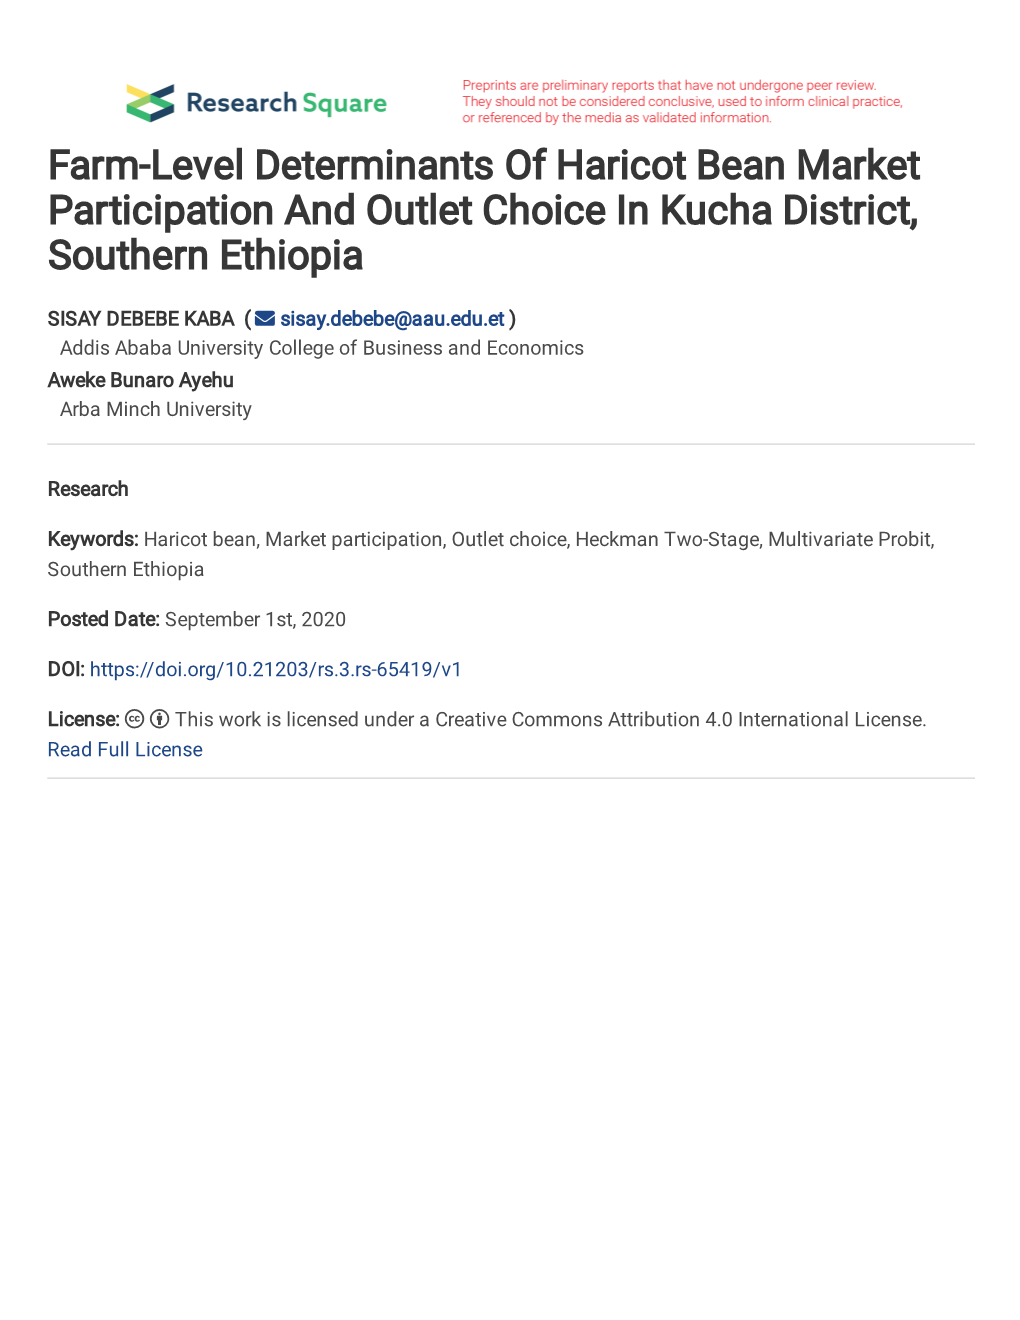 Farm-Level Determinants of Haricot Bean Market Participation and Outlet Choice in Kucha District, Southern Ethiopia